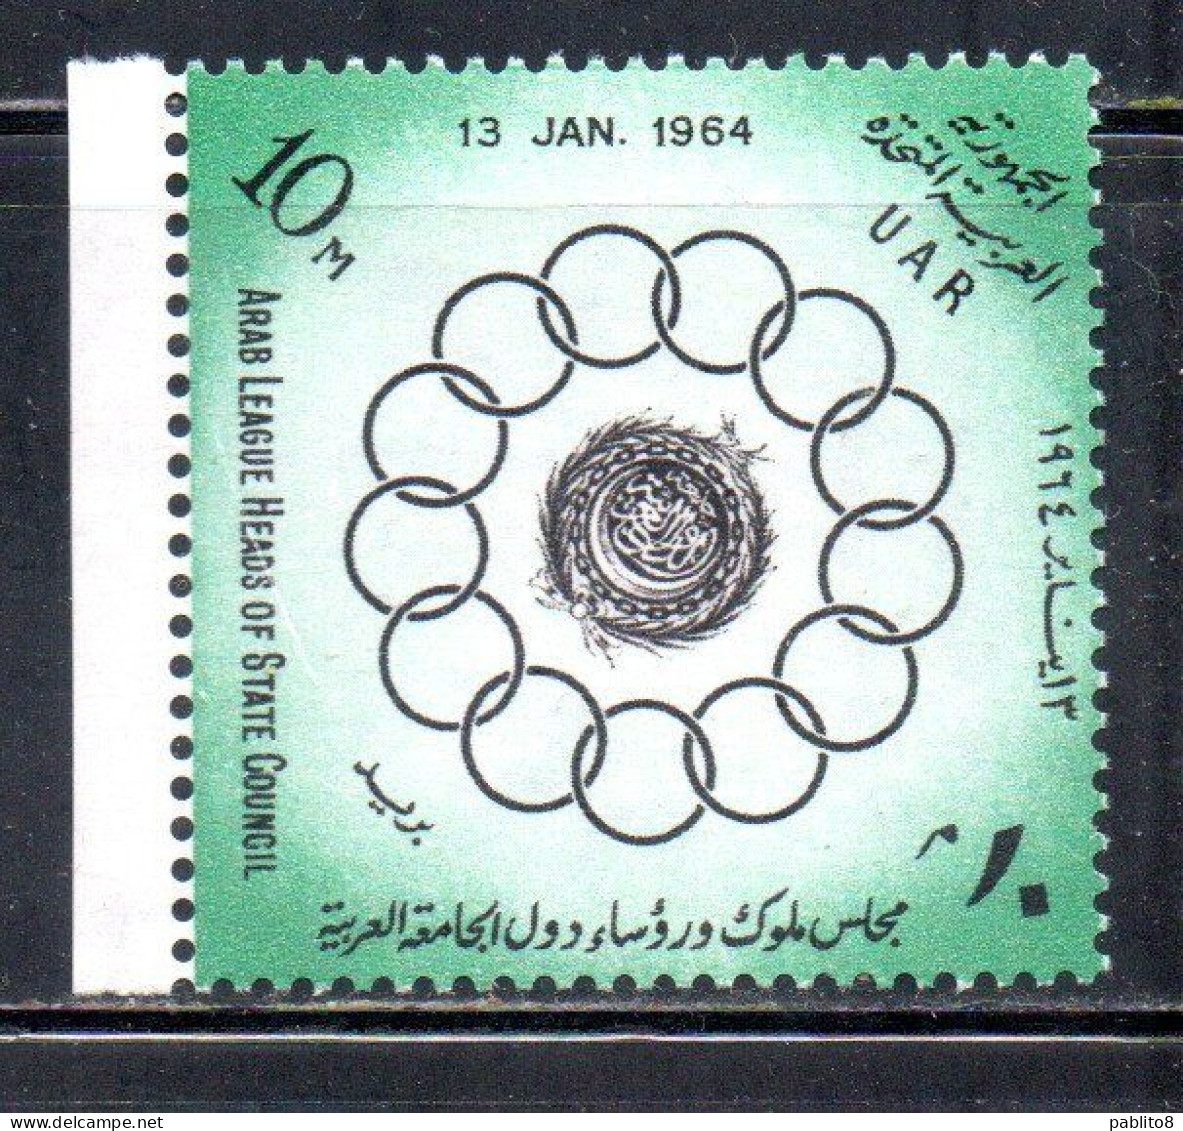 UAR EGYPT EGITTO 1964 FIRST MEETING OF THE HEADS STATE OF THE ARAB LEAGUE CAIRO 10m MNH - Ungebraucht